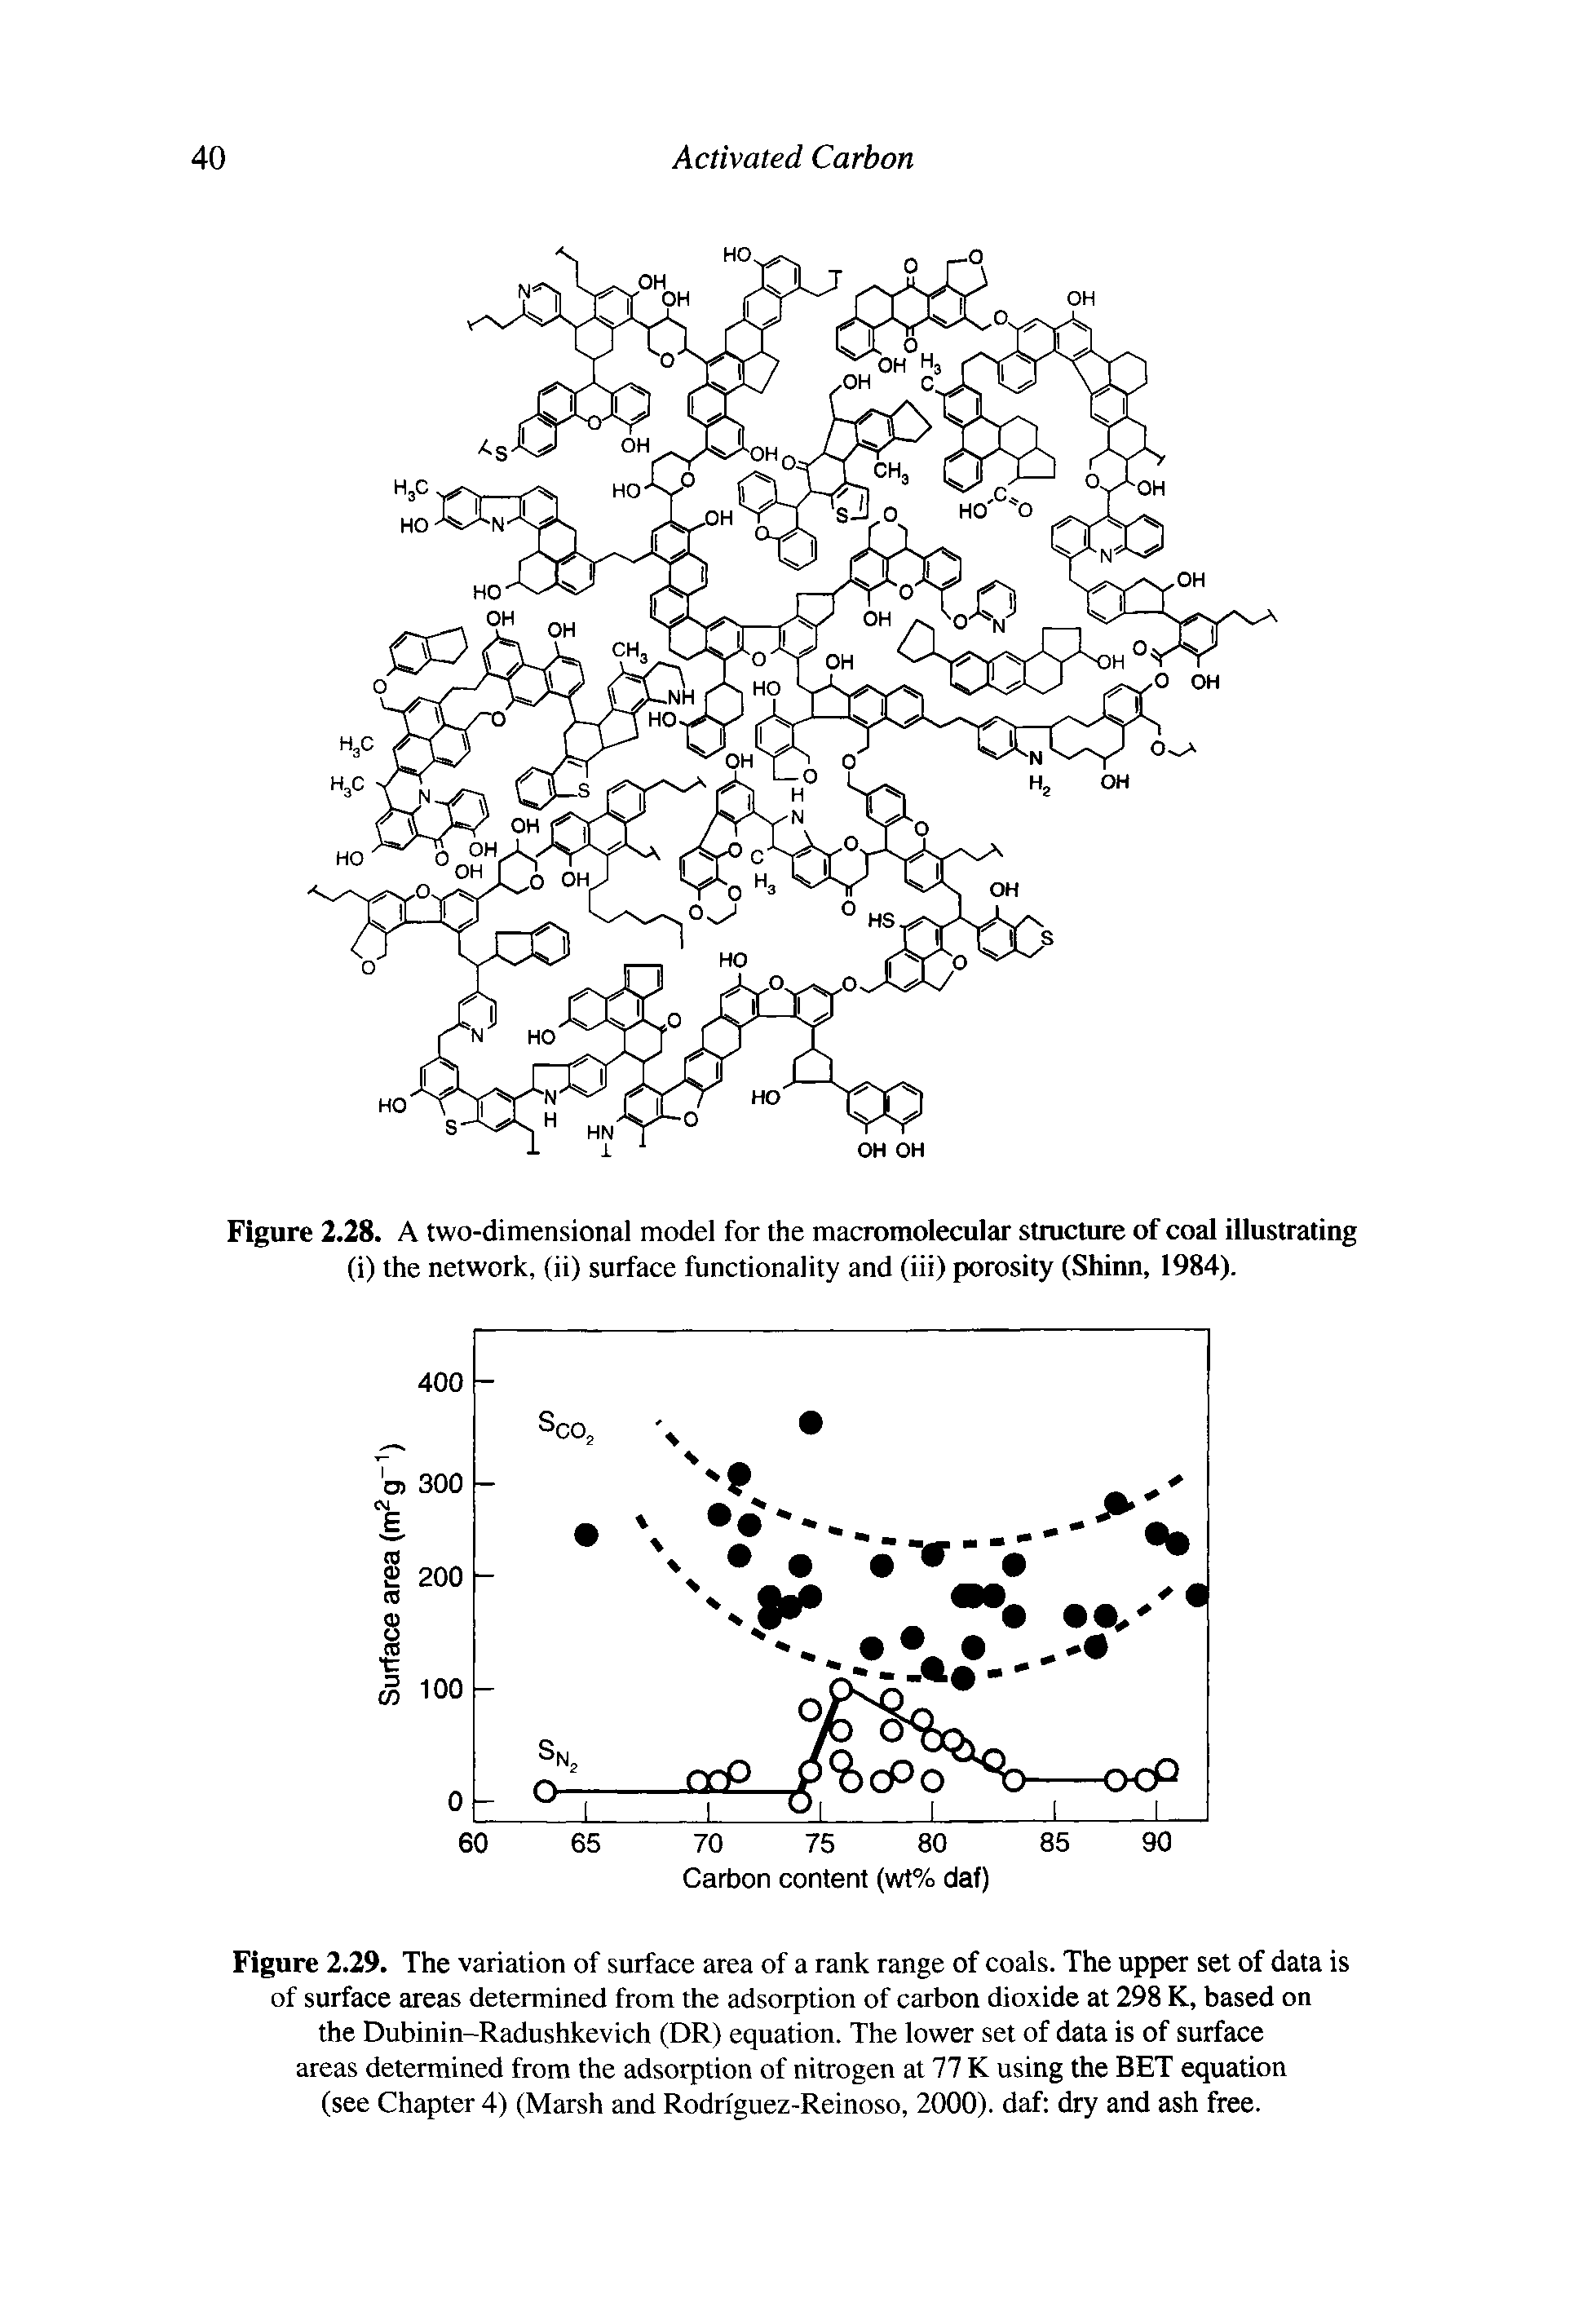 Figure 2.28. A two-dimensional model for the macromolecular structure of coal illustrating (i) the network, (ii) surface functionality and (iii) porosity (Shinn, 1984).